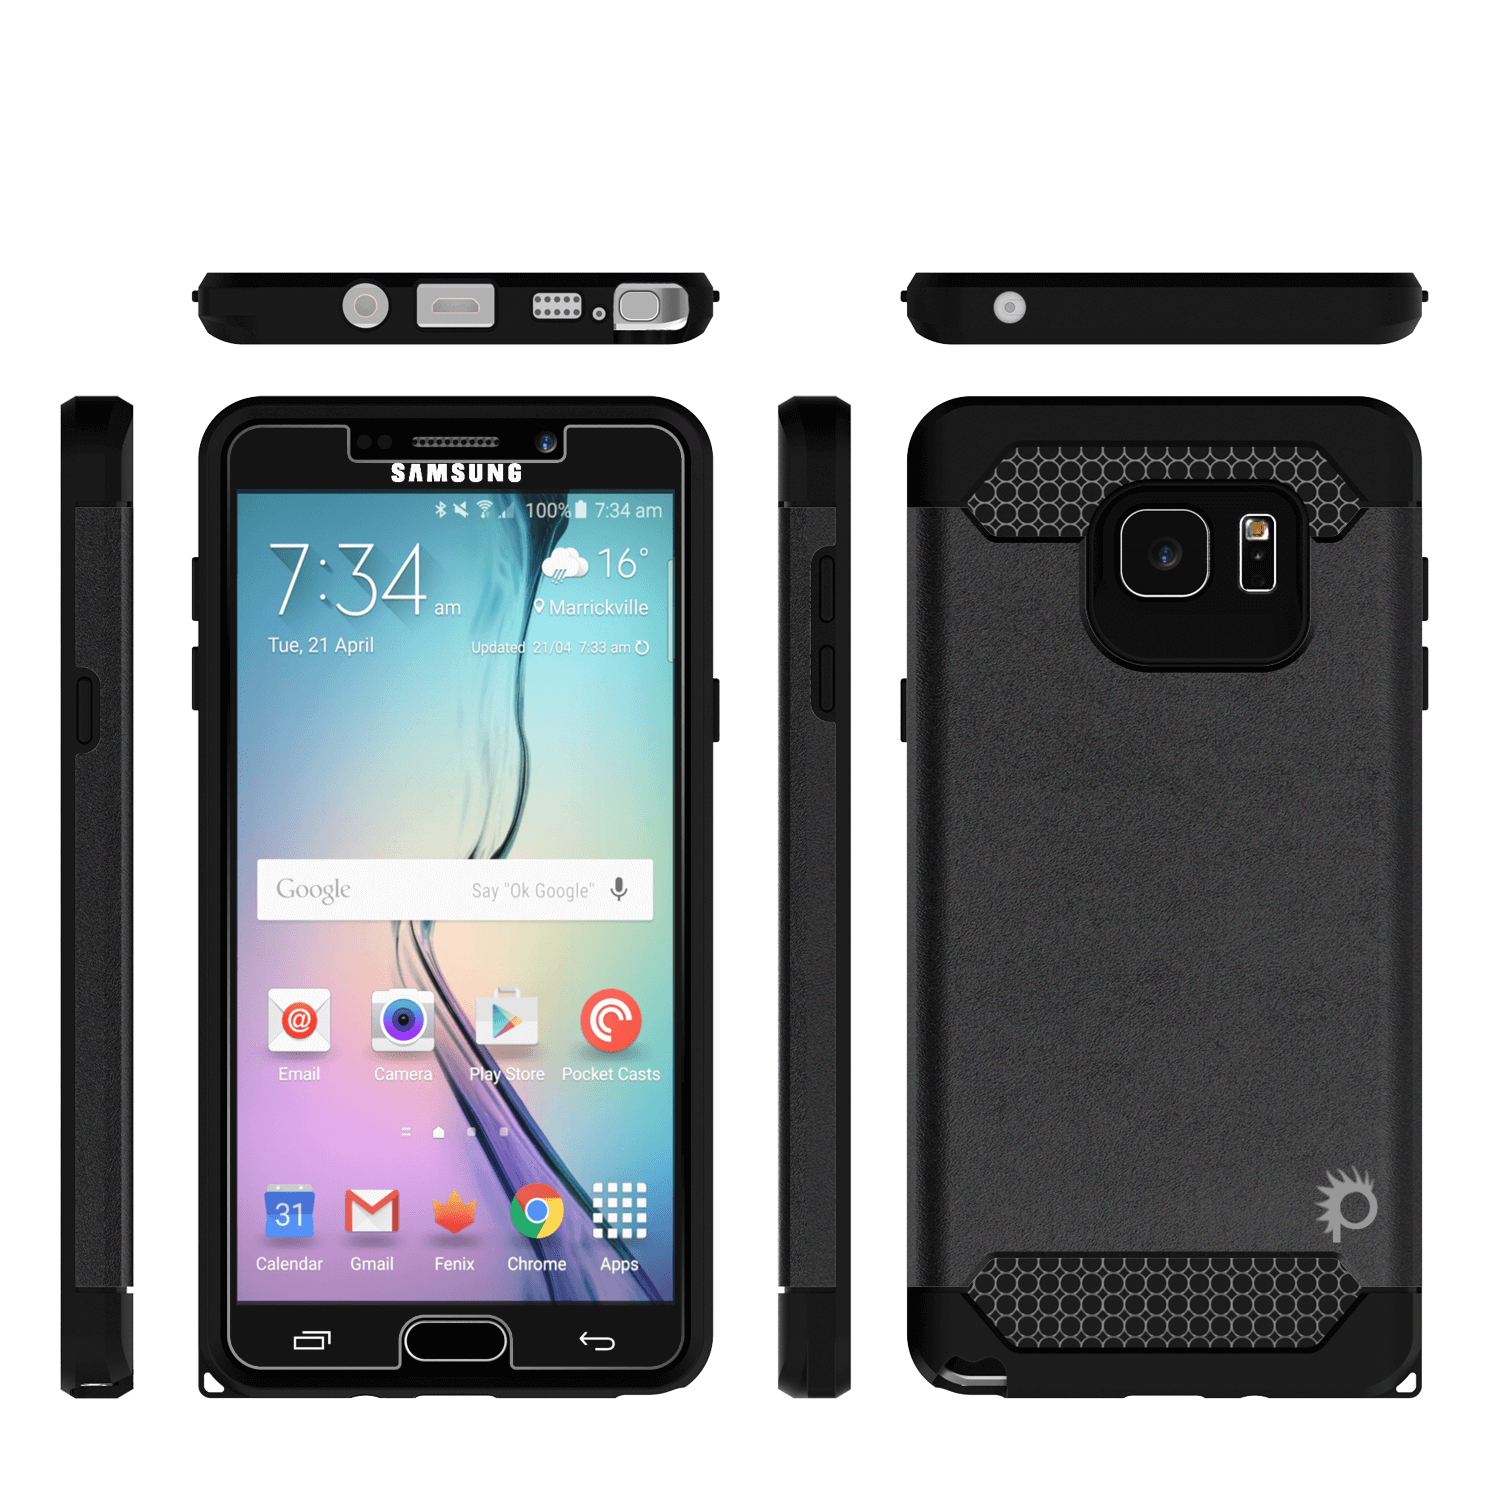 Galaxy Note 5 Case PunkCase Galactic Black Series Slim Armor Soft Cover Case w/ Tempered Glass - PunkCase NZ